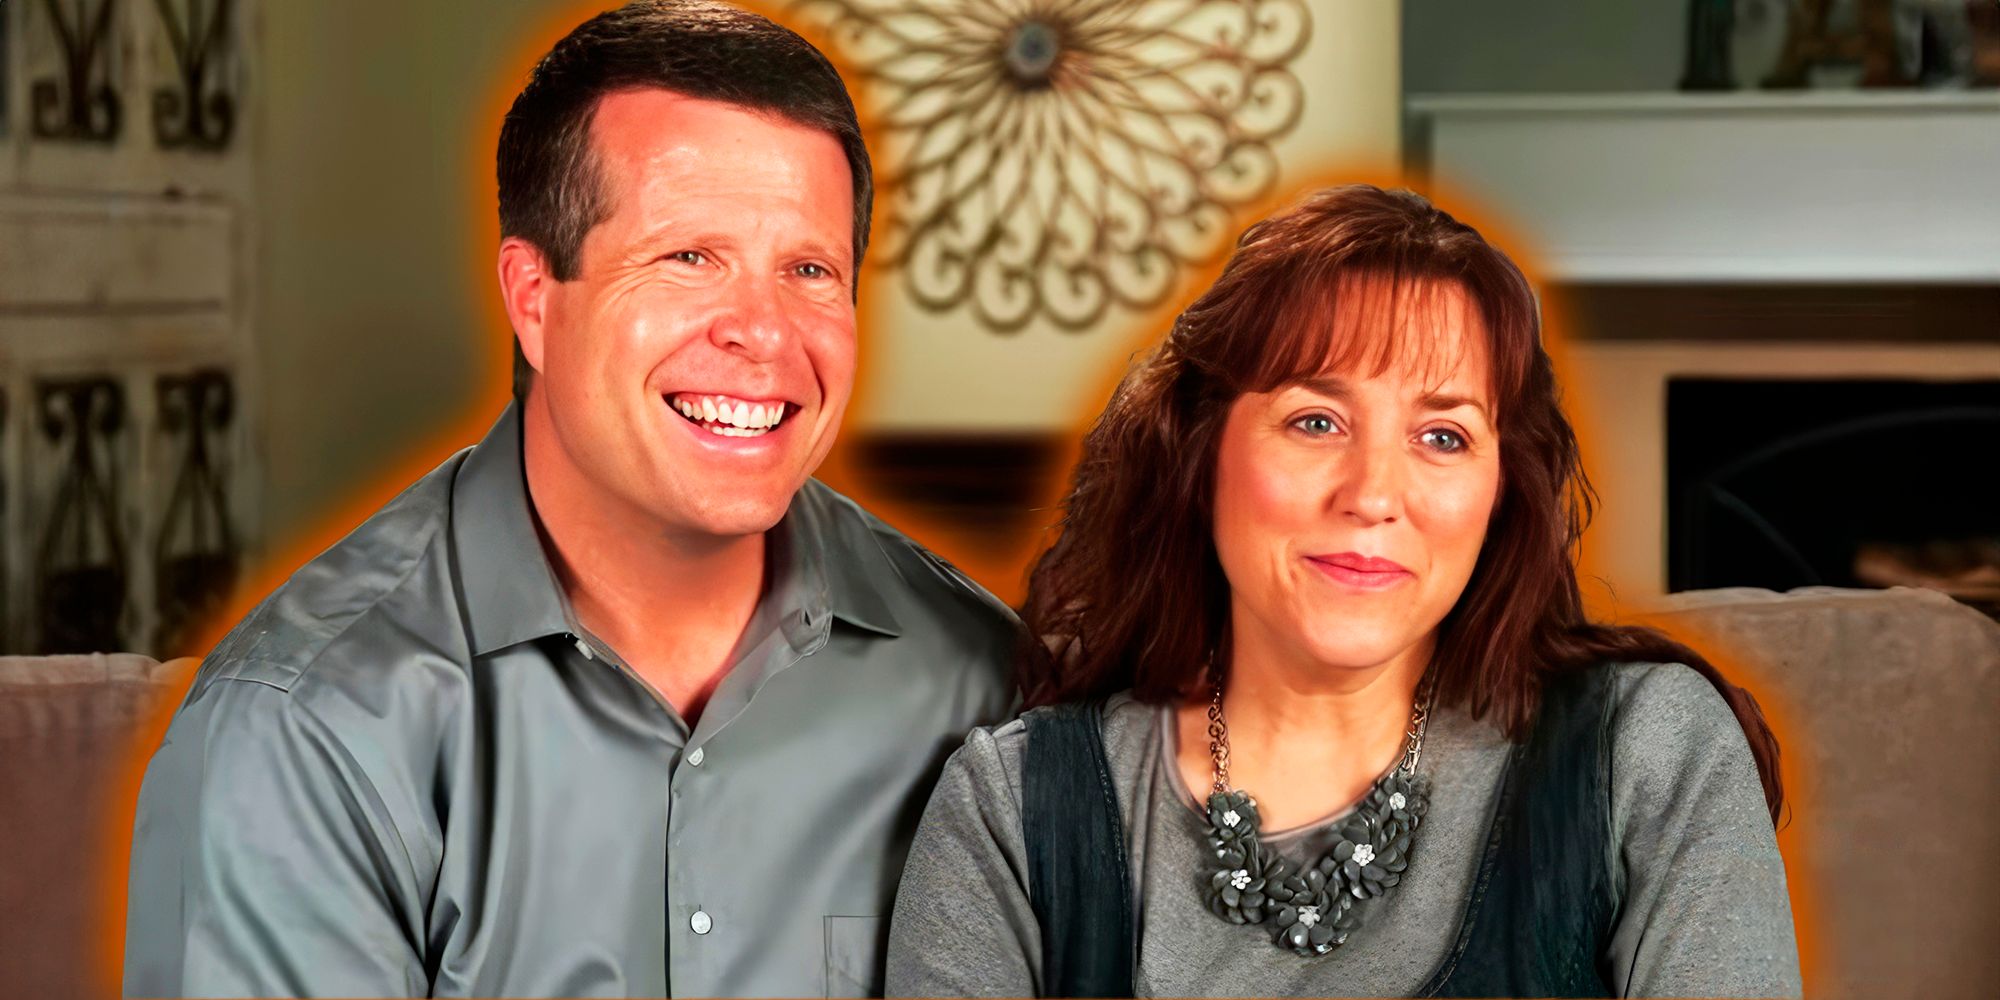 Jim Bob and Michelle Duggar montage smiling with home background